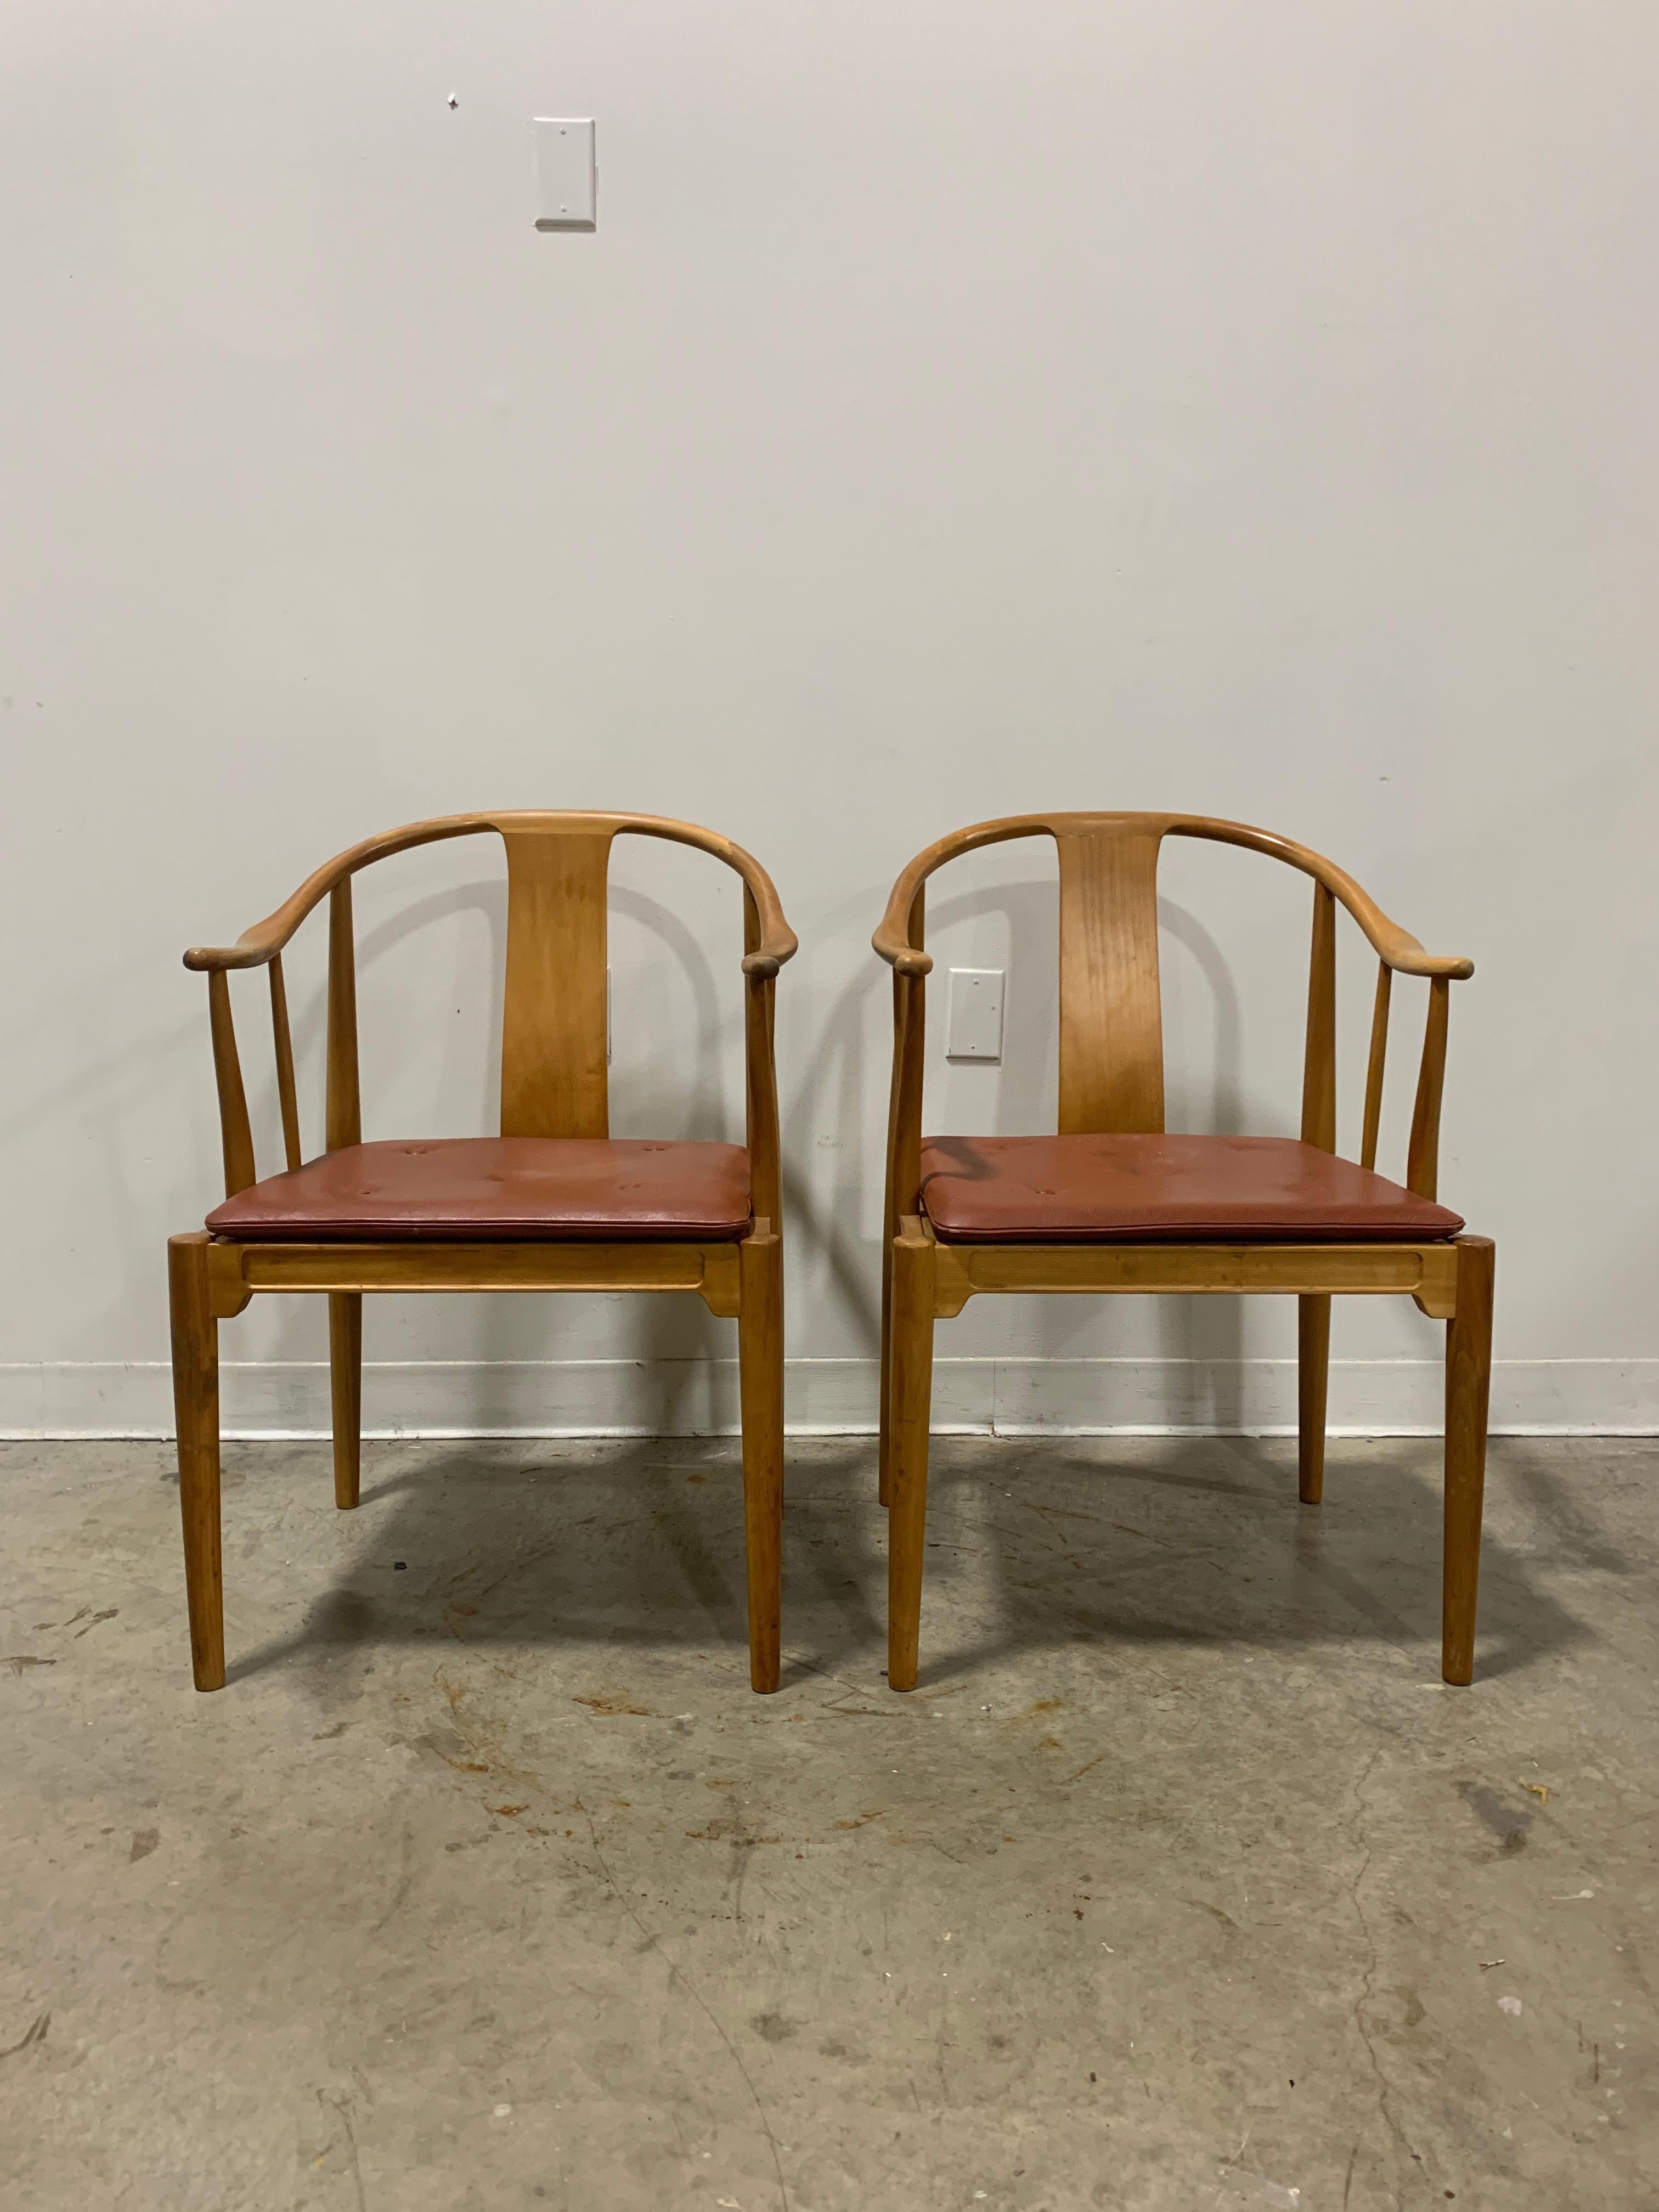 Highly collectable 1944 design by Hans Wegner- an interpretation of traditional Chinese style chairs. Slender natural cherry frames with a leather seat pad supported by webbing. Minimalist design sold by Illums Bolighus in Copenhagen, Denmark. Both